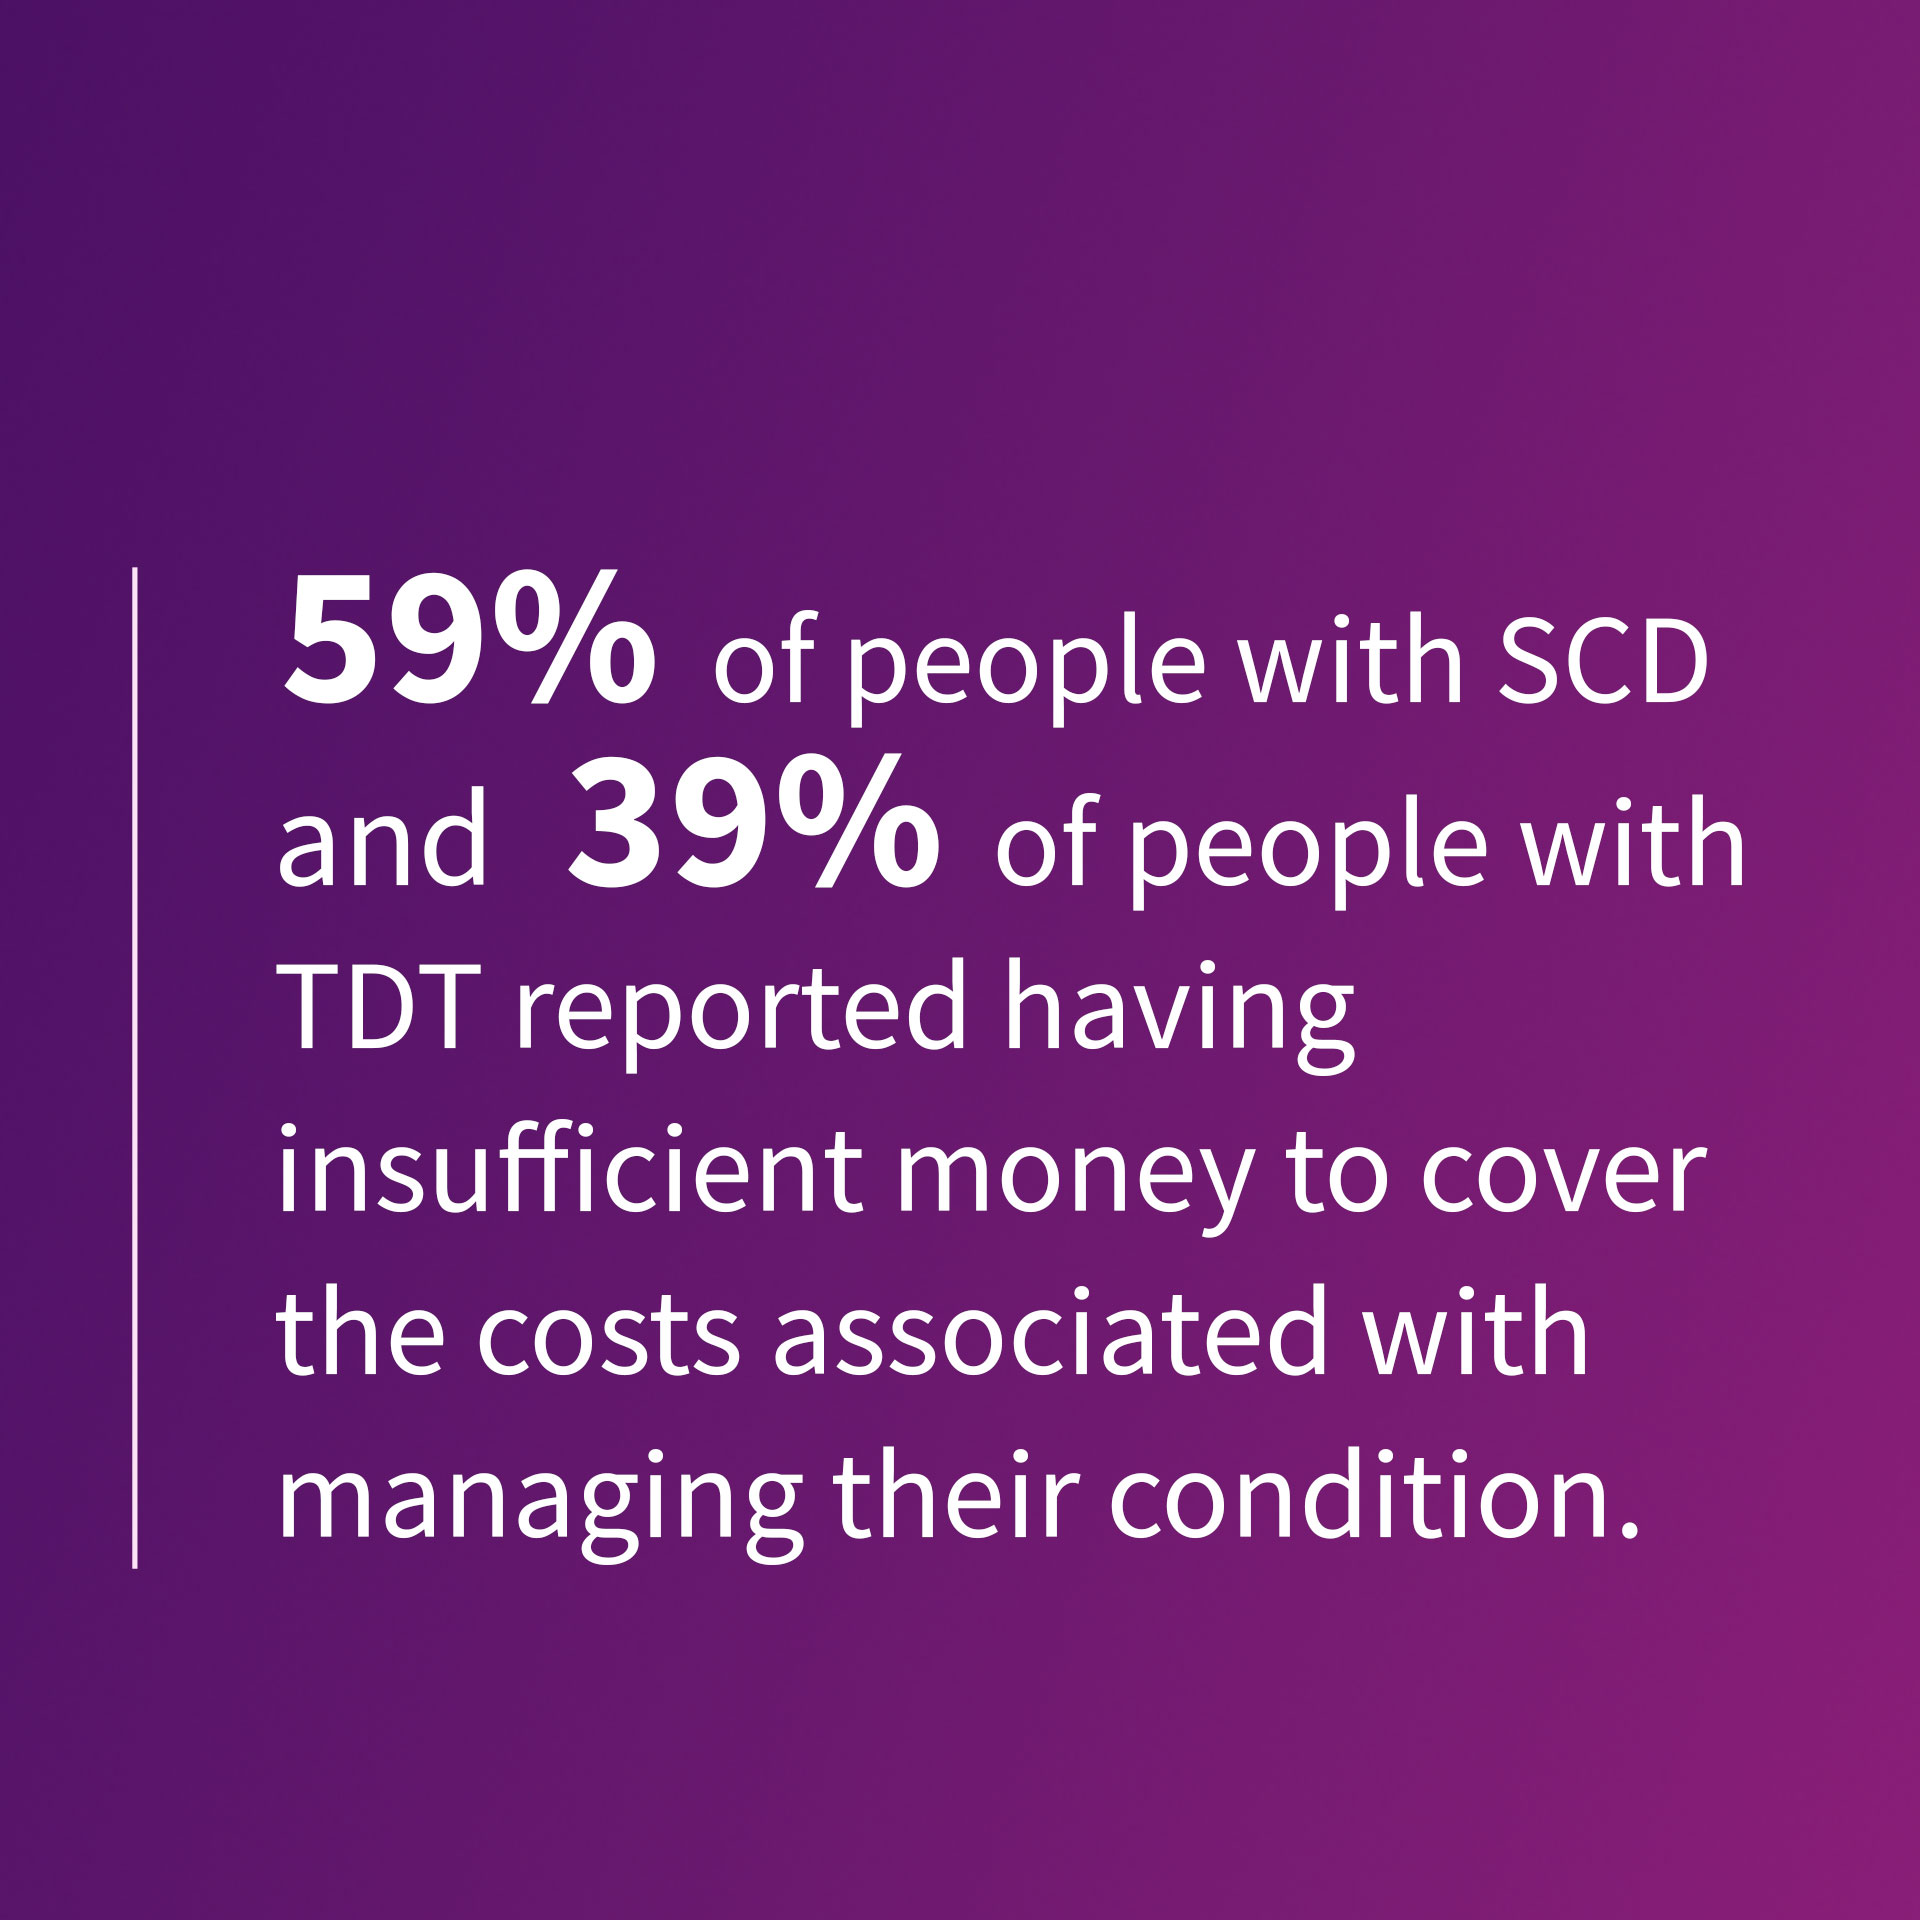 An infographic stating: 59% of people with SCD and 39% of people with TDT reported having insufficient money to cover the costs associated with managing their condition 